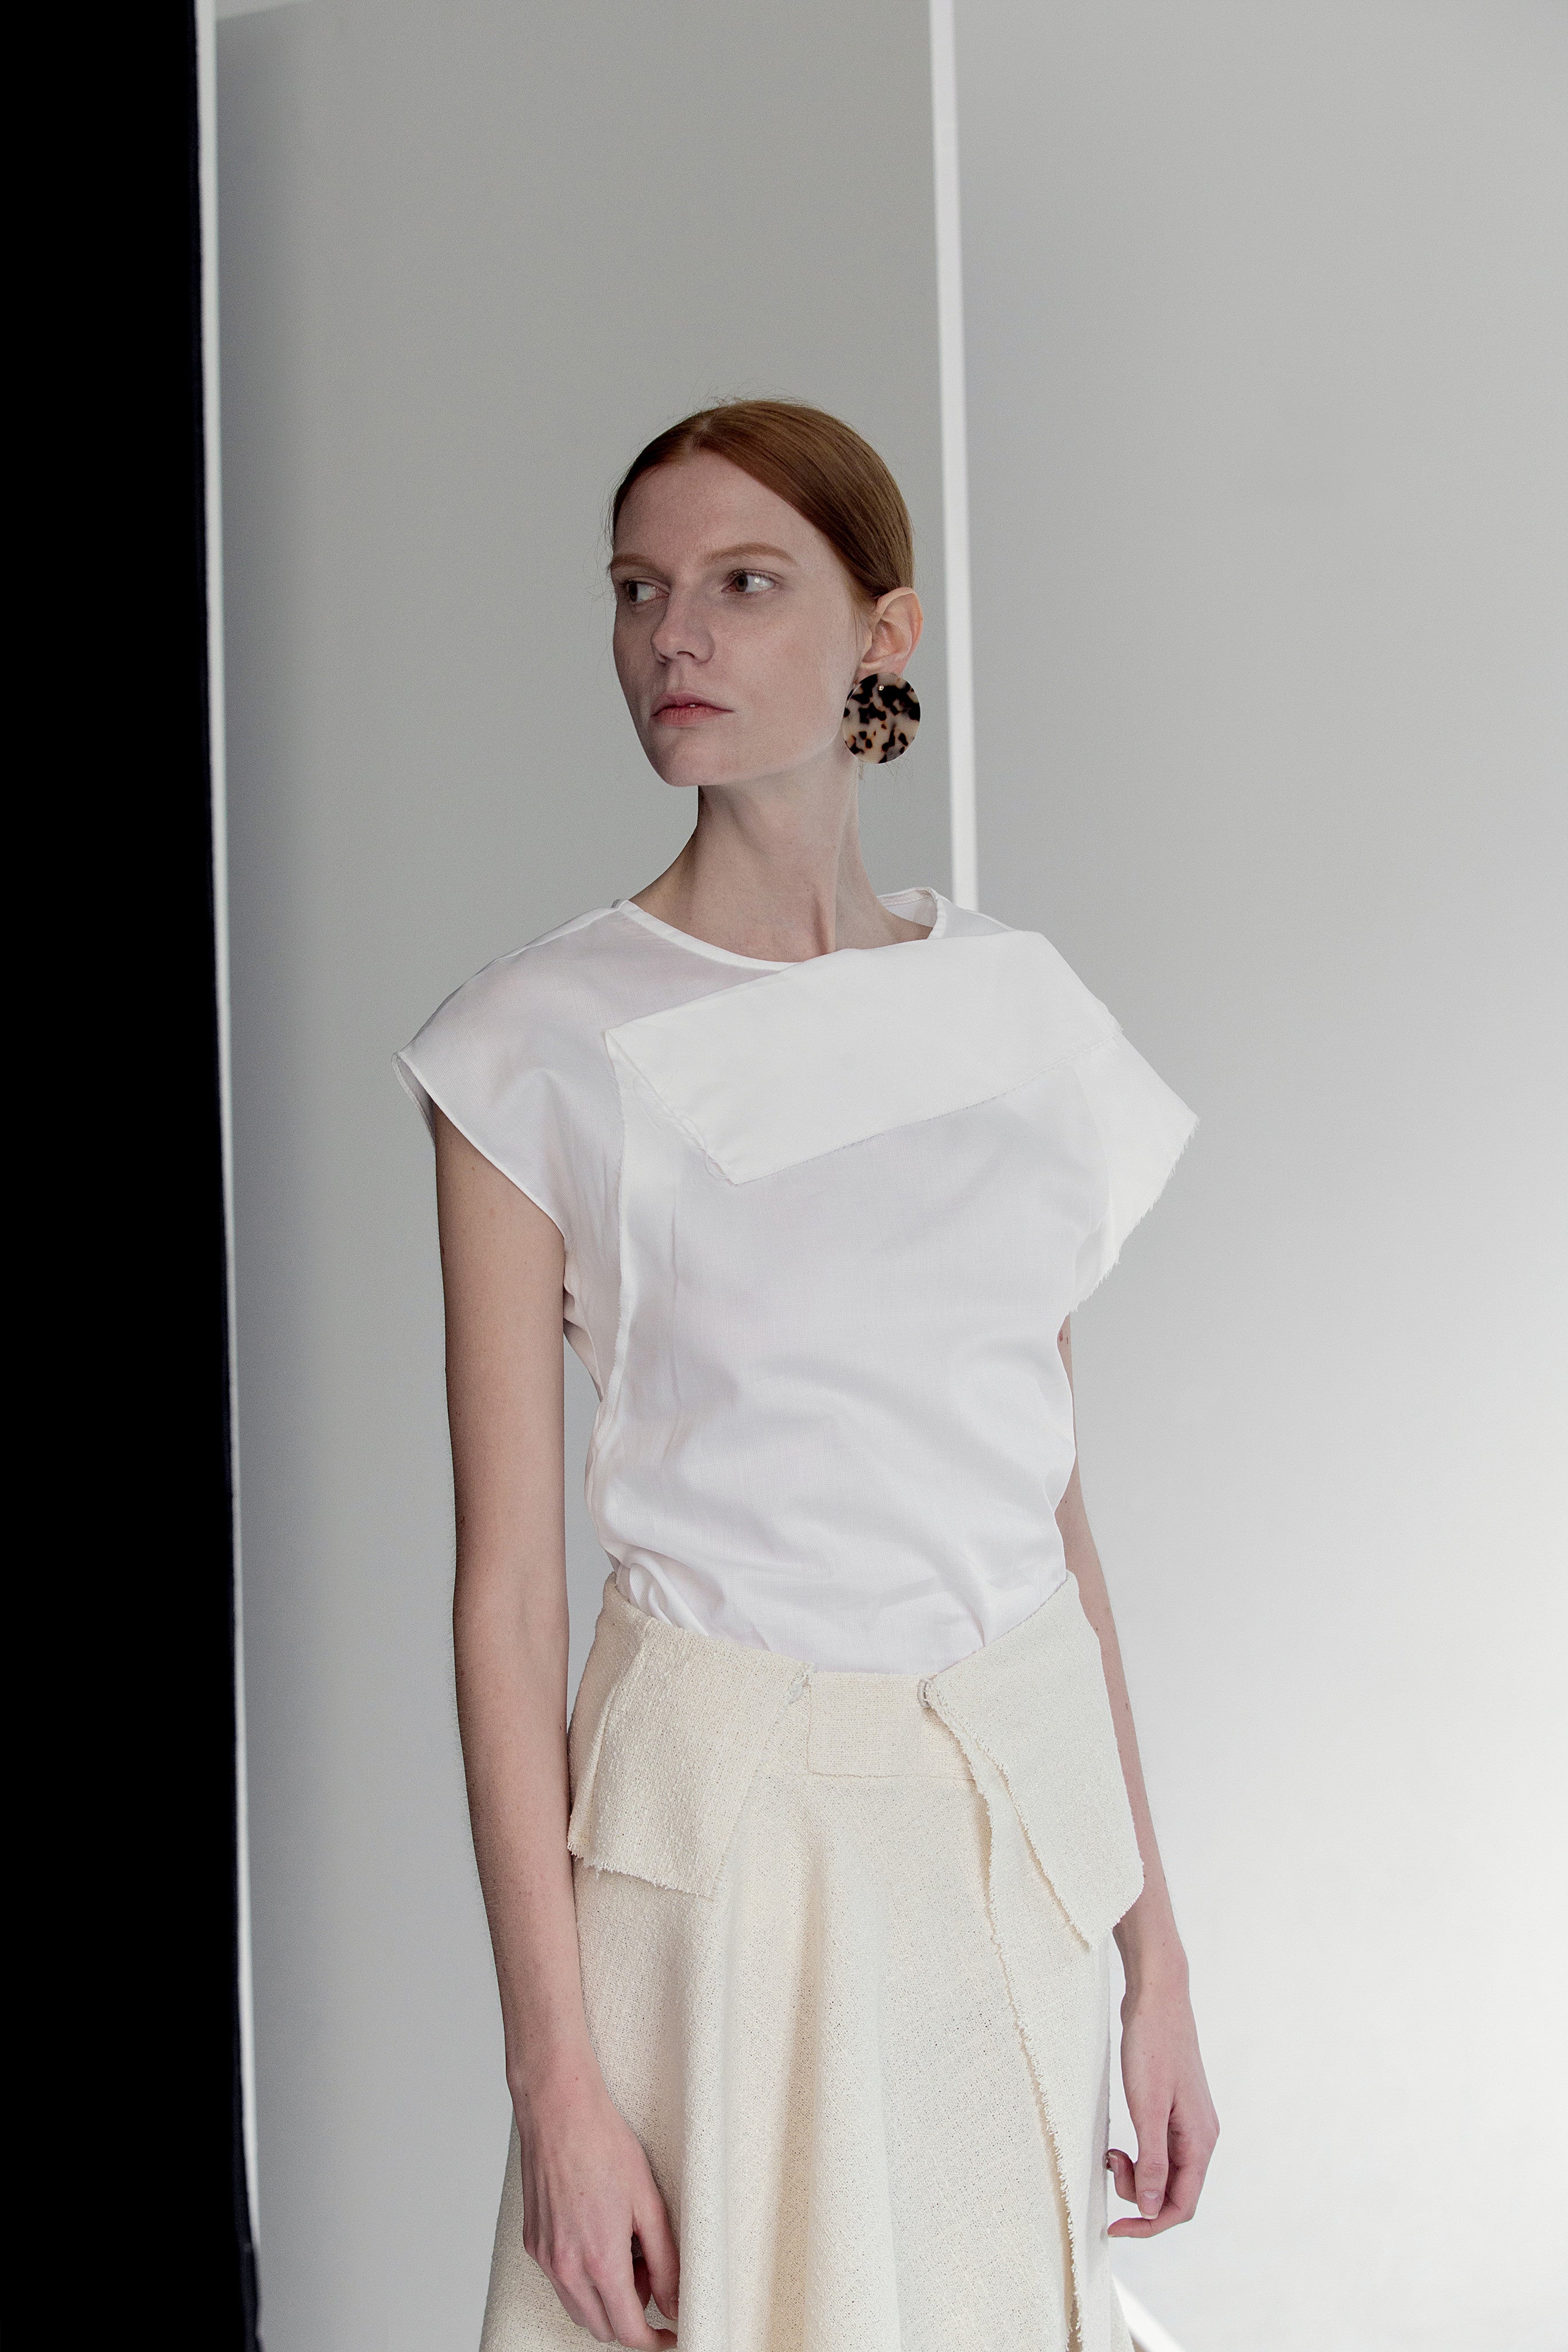 The Acre Top in white featuring cap sleeveless top with boat neckline, folded drape bodice detailing. Concealed zip down center back. 